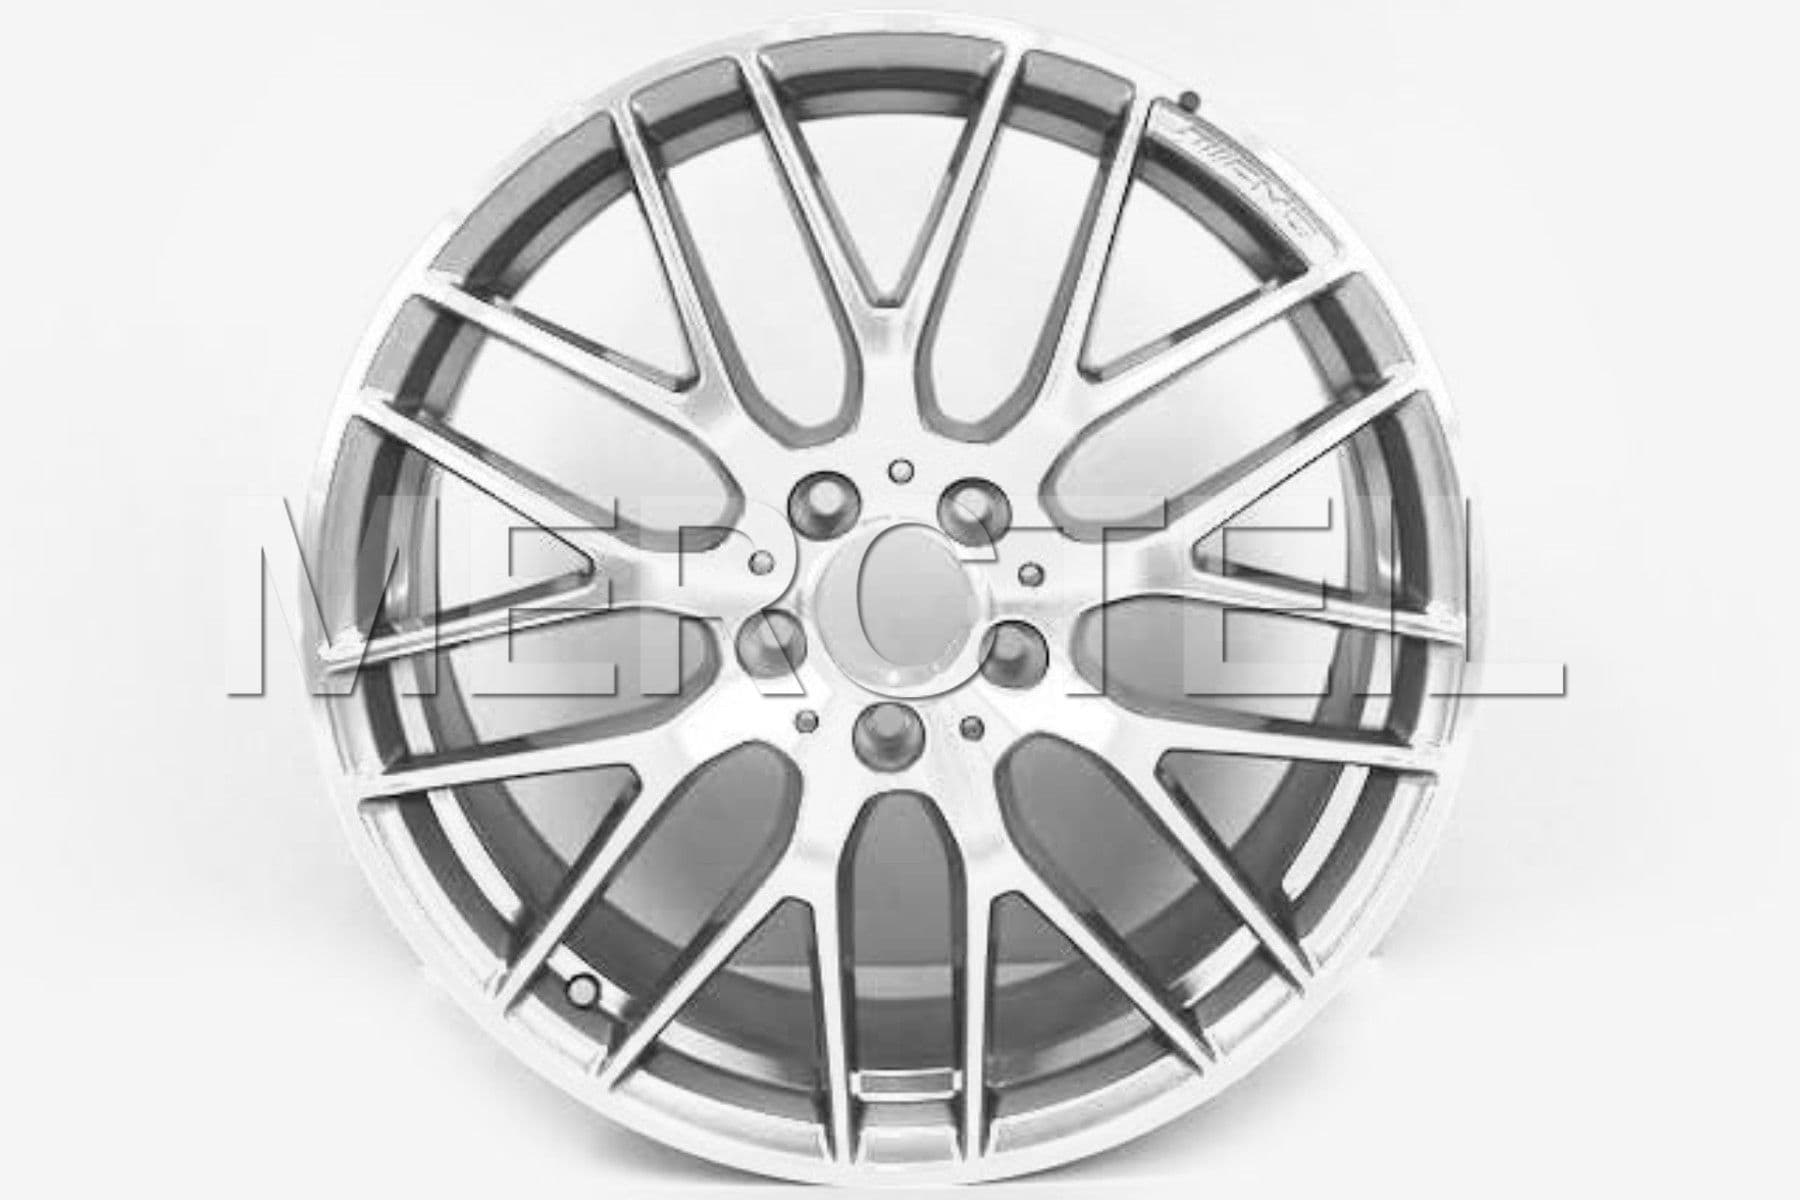 AMG 19 Inch Set Of Alloy Wheels for A-Class (part number: A17640109007X21)